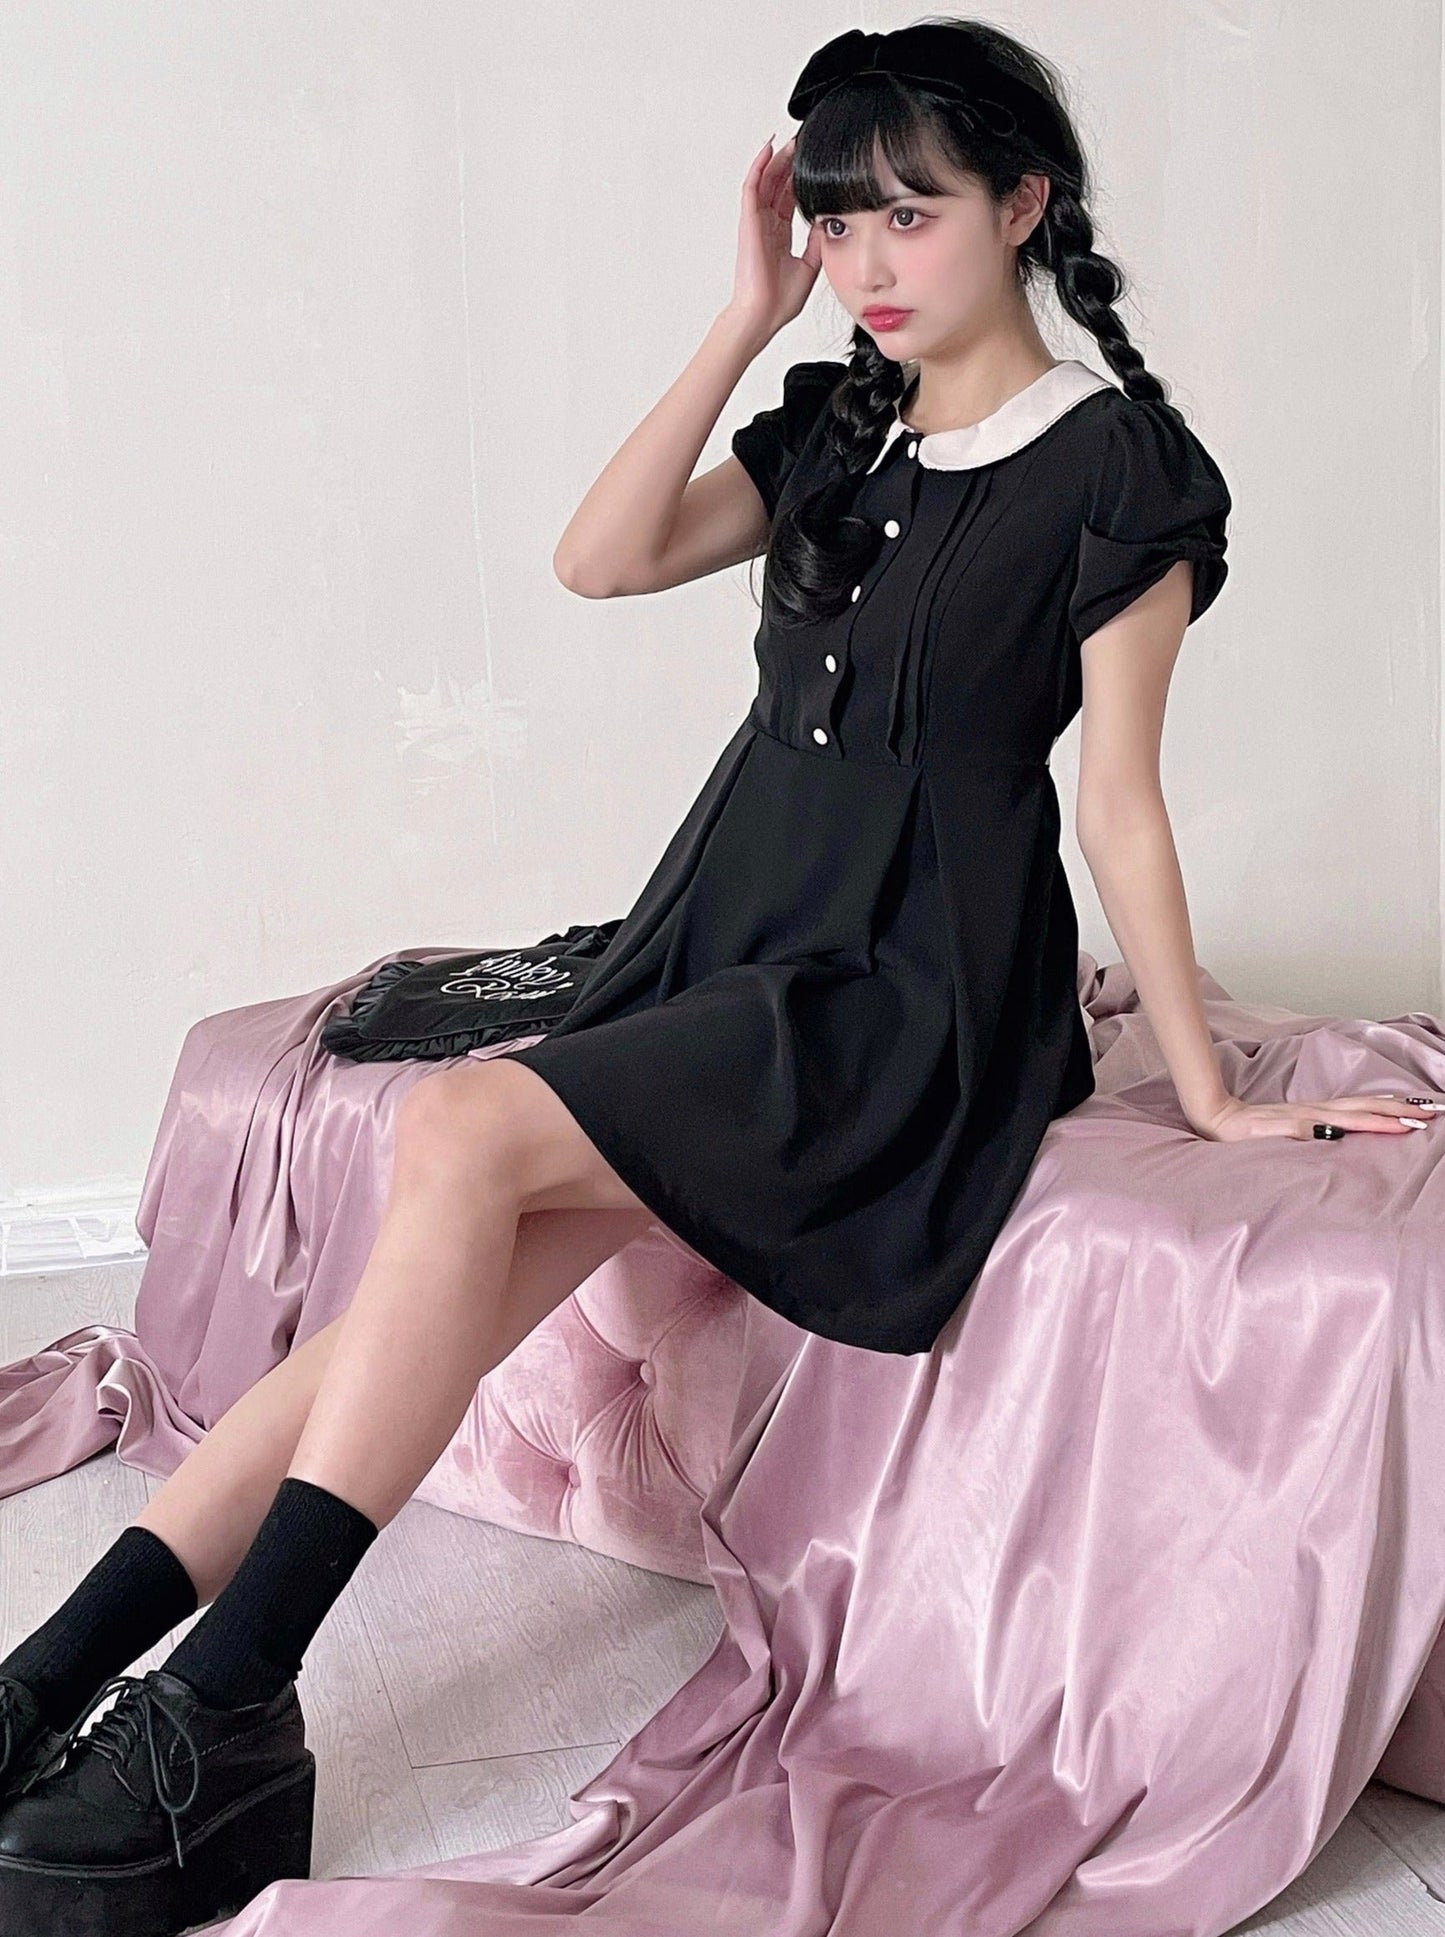 Doll color girly puff sleeve dress